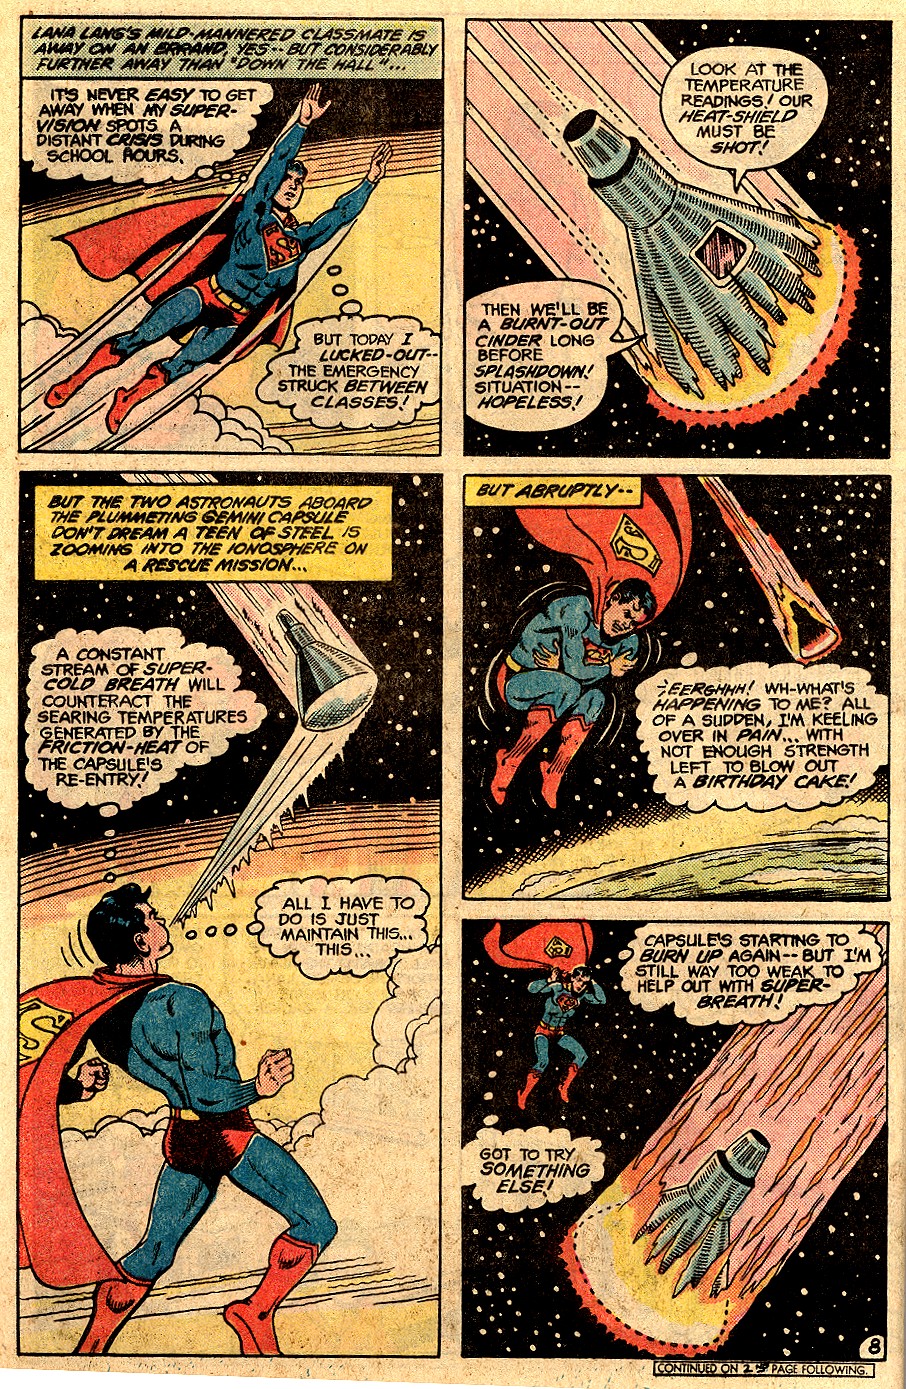 The New Adventures of Superboy 32 Page 11